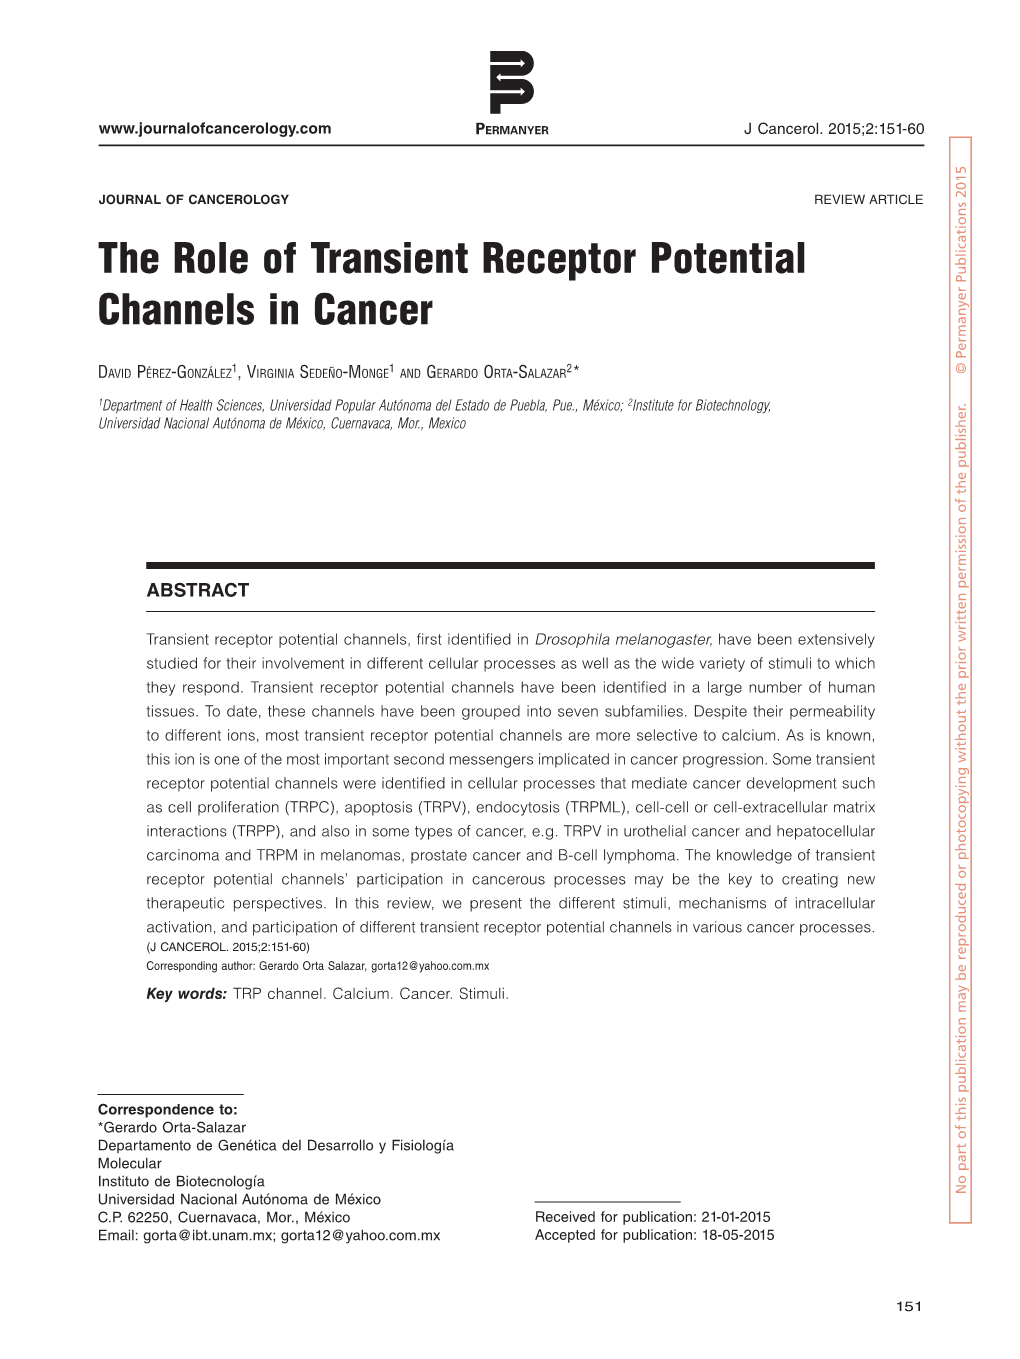 The Role of Transient Receptor Potential Channels in Cancer